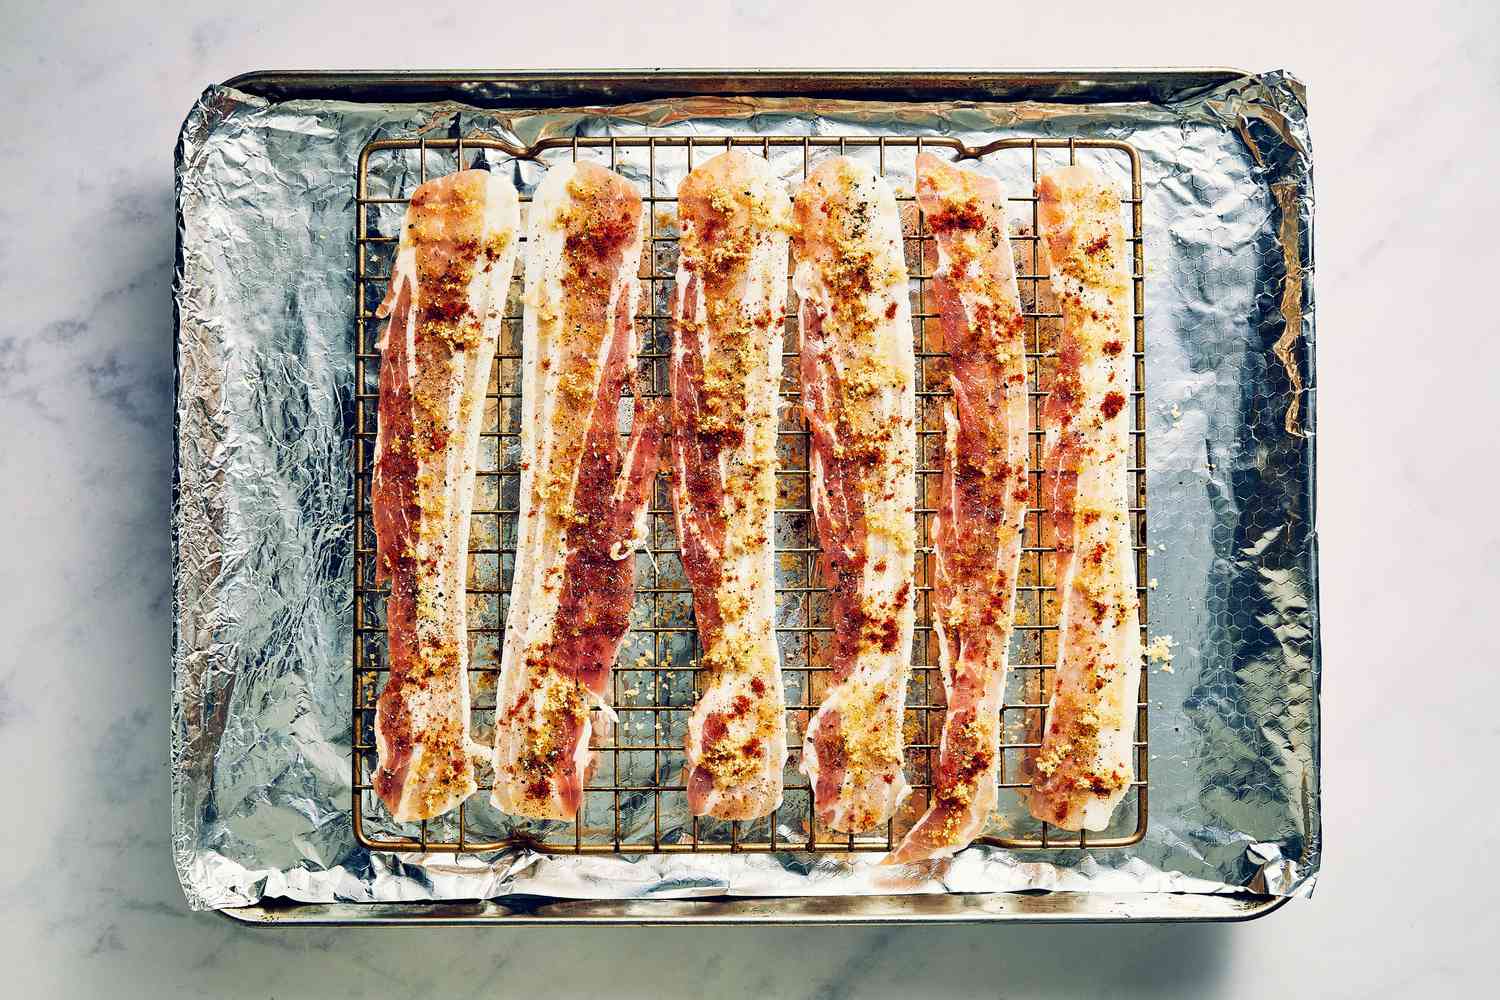 A foil-lined baking sheet with six pieces of bacon topped with brown sugar, black pepper, and cayenne pepper on a baking rack